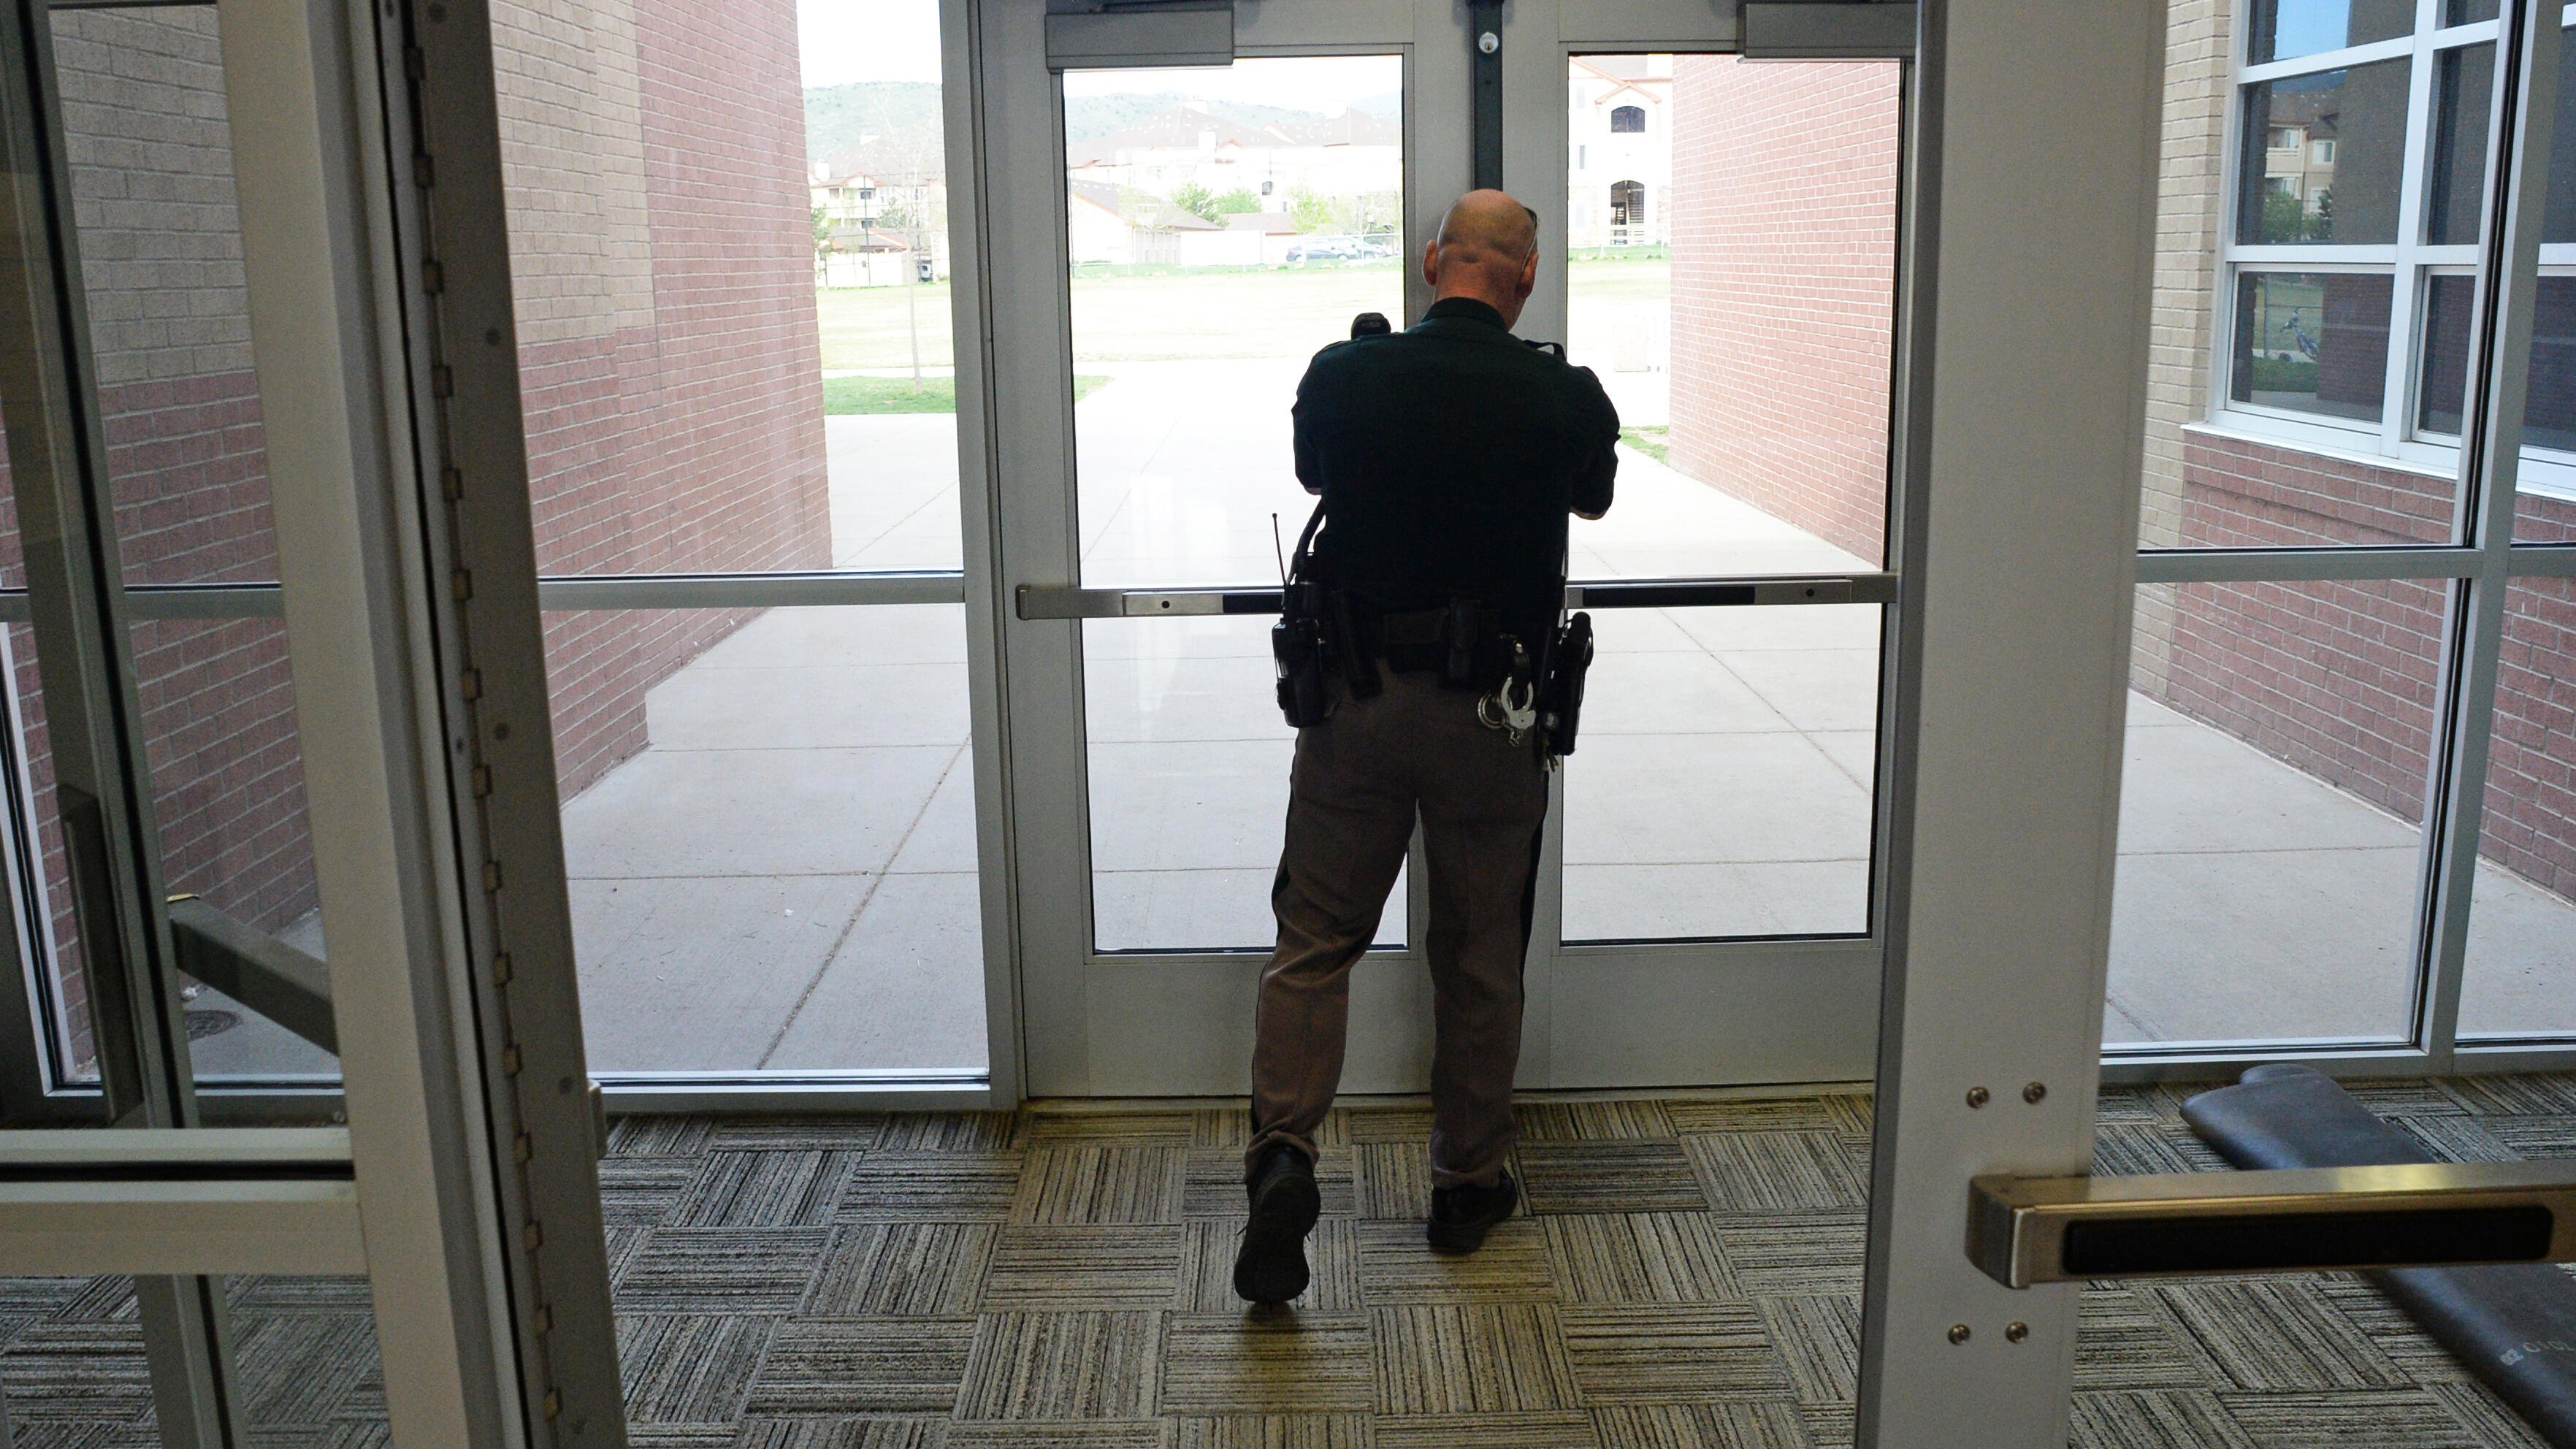 LITTLETON, CO - MAY 06: Deputy Greg Everhart, of the Jefferson County Sheriff's Department, checks to make sure side doors are locked at Falcon Bluffs Middle School in Littleton, May 07, 2014. Everhart, who has been a school resource officer for 11 years,